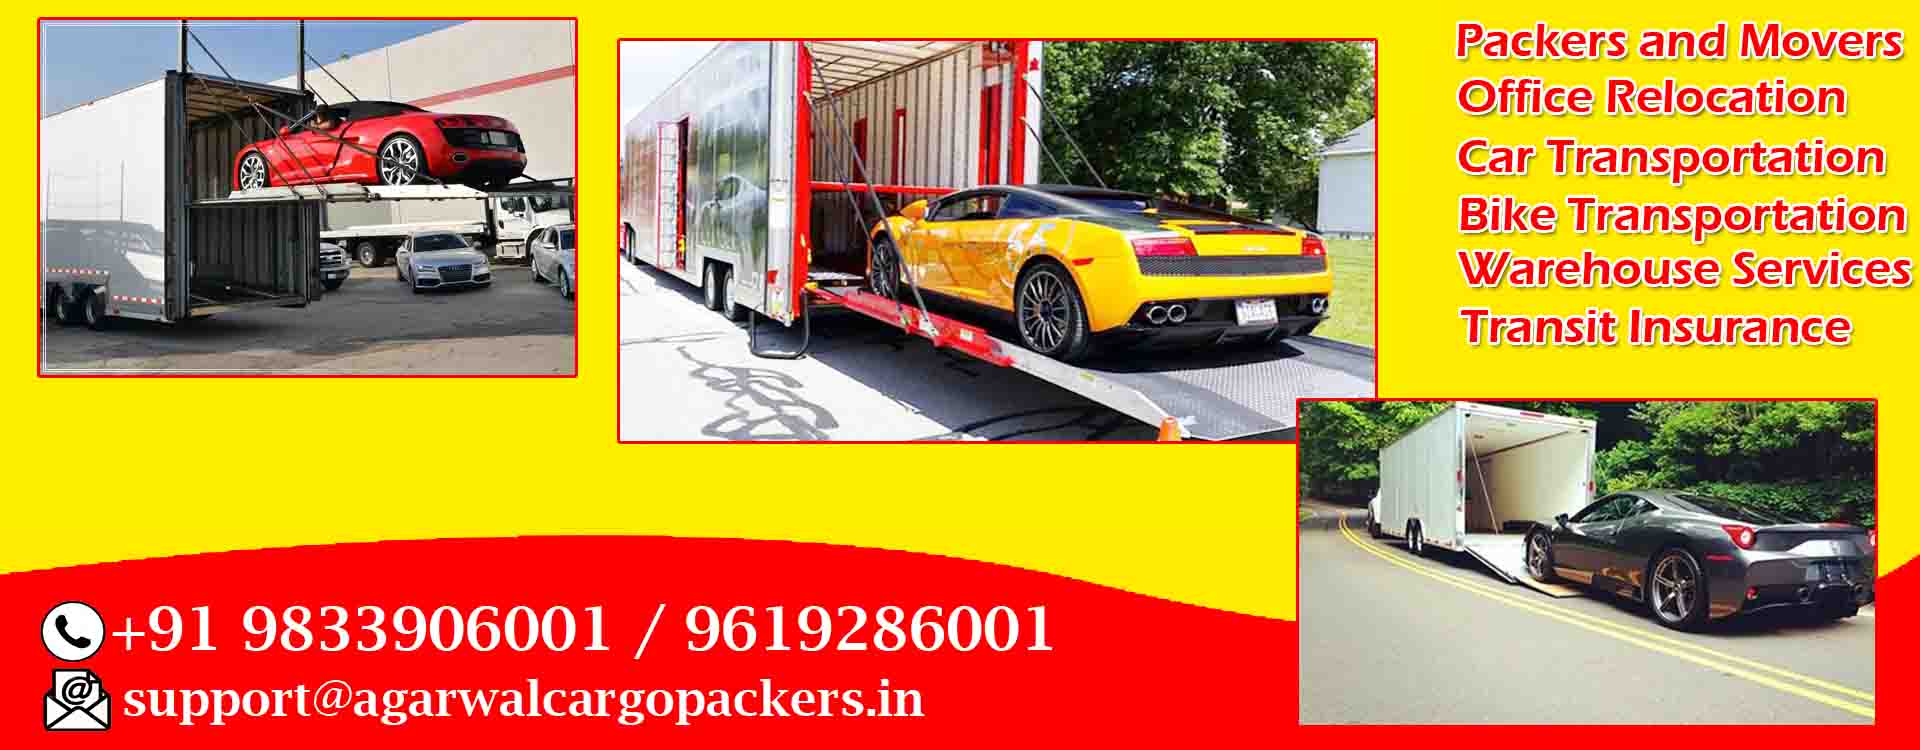 Packers and Movers Valmiki Nagar